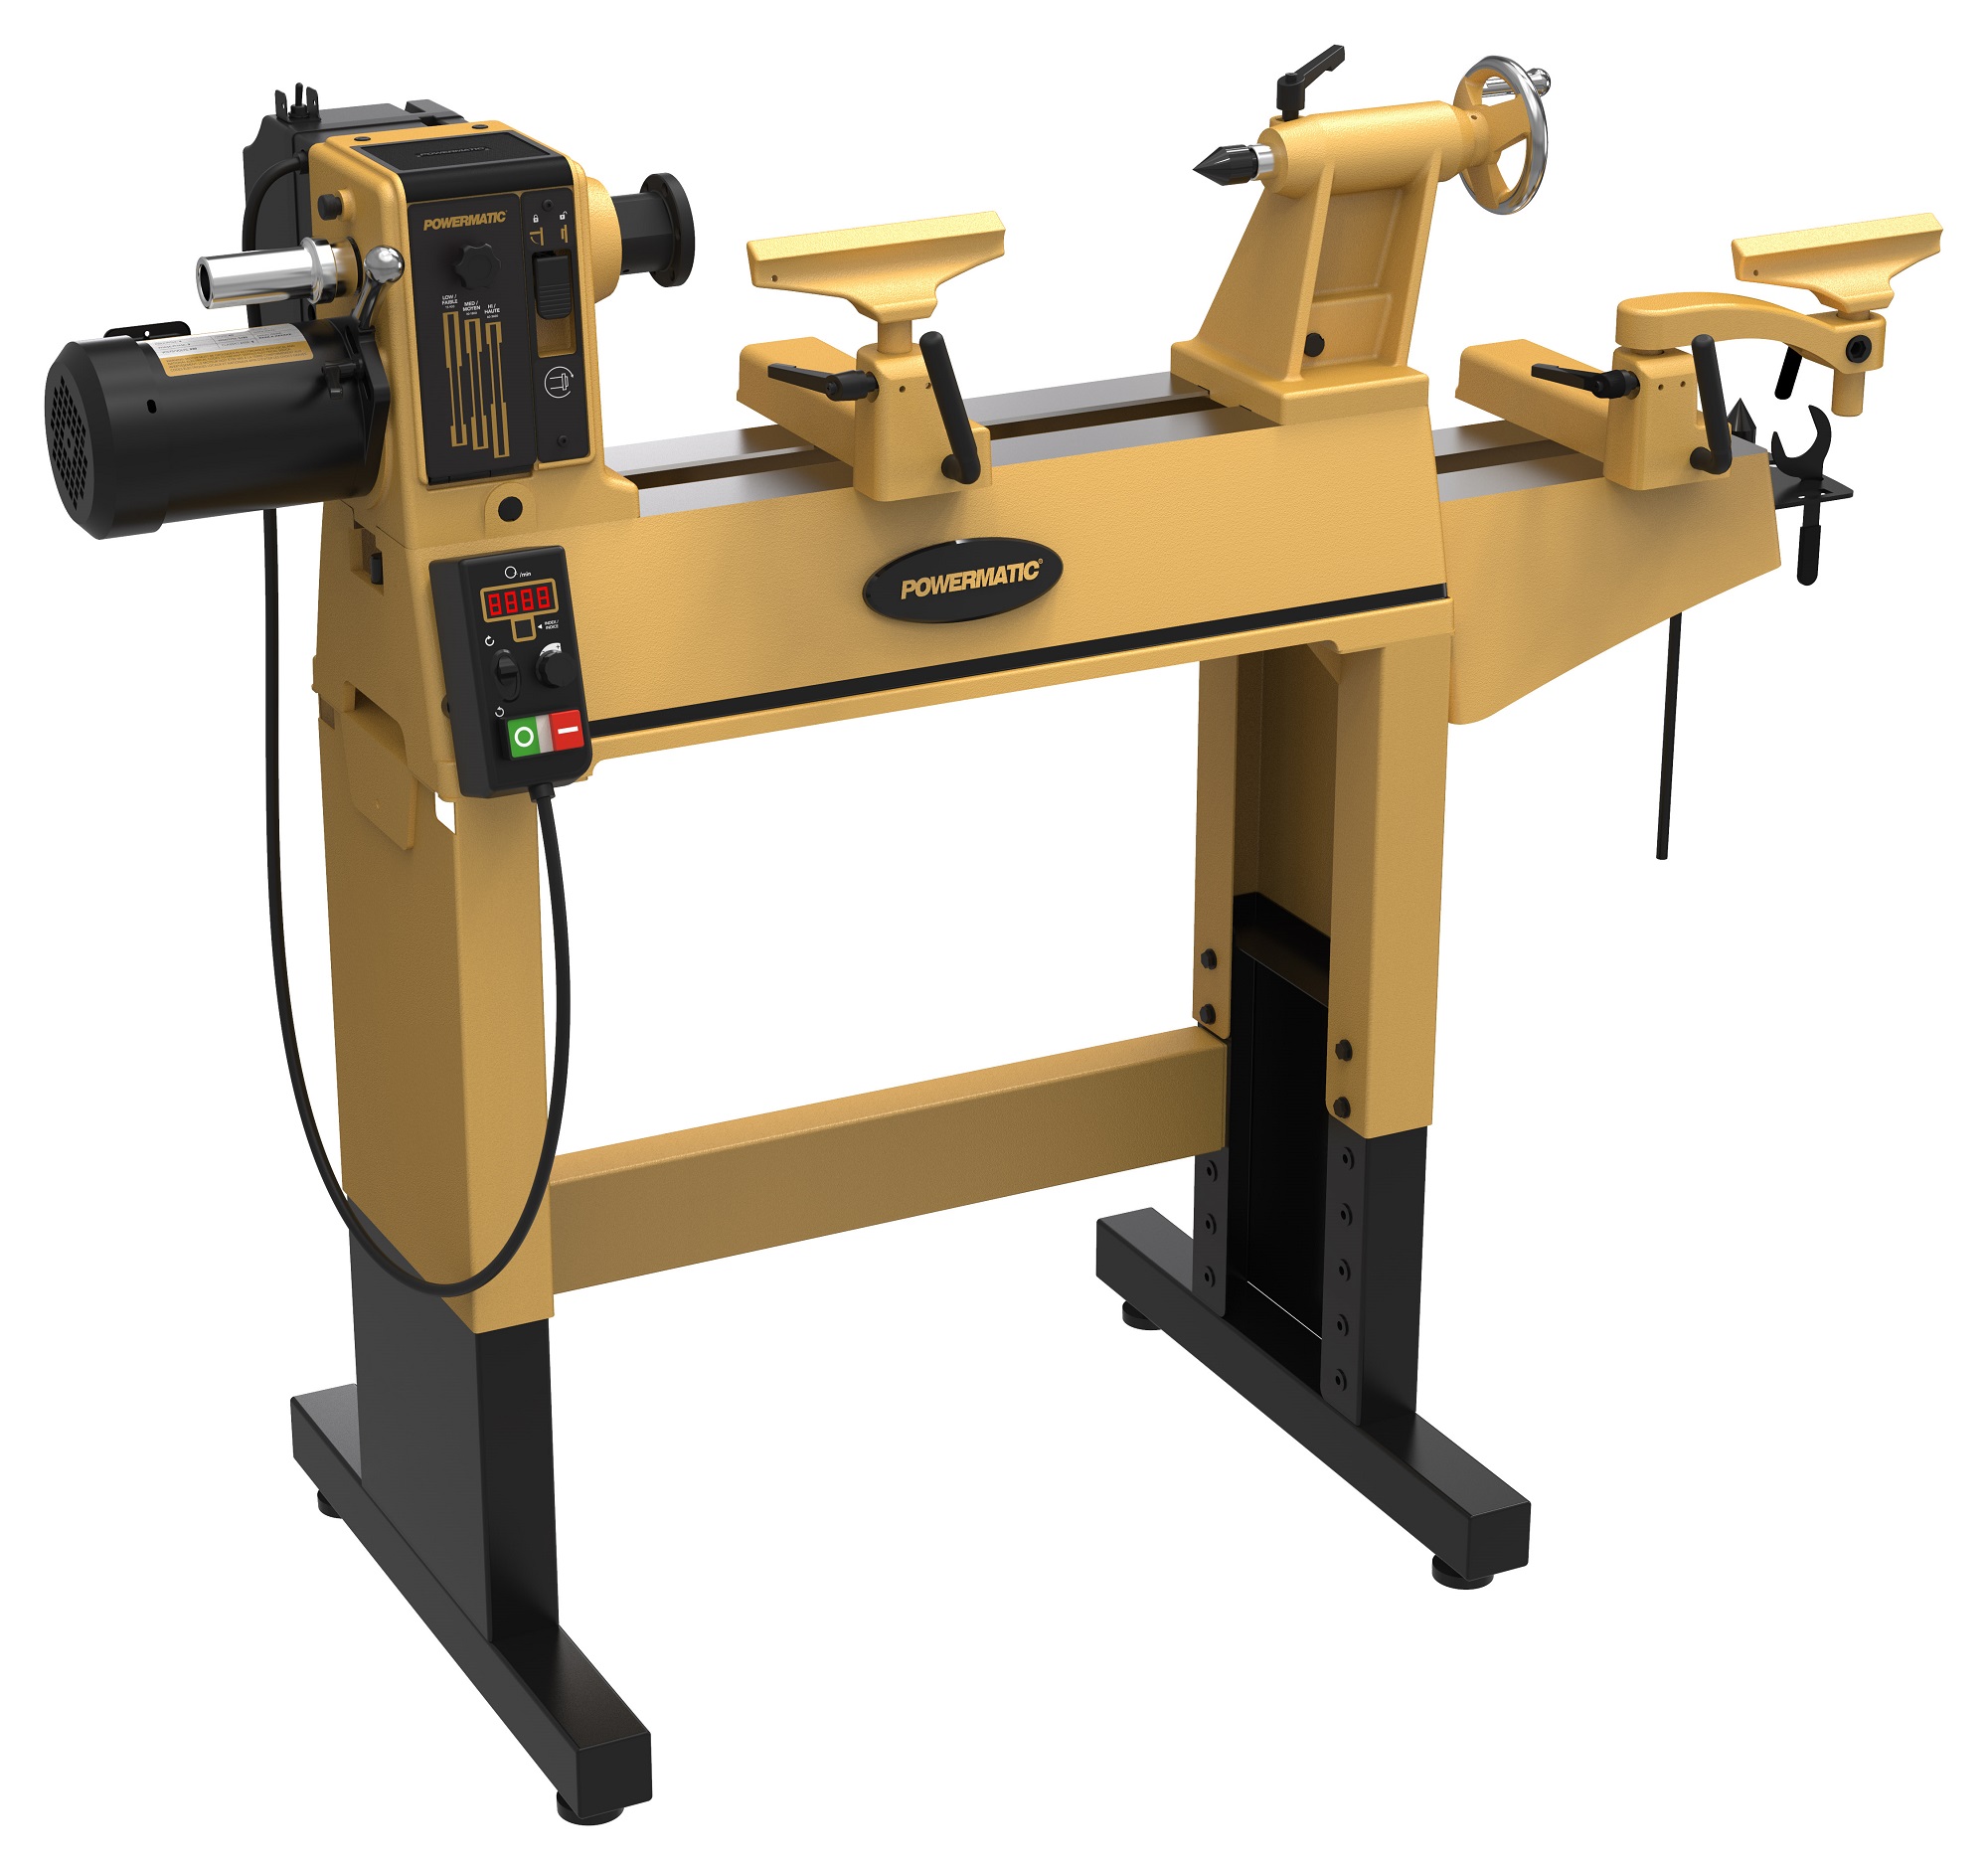 Wood lathe with 115V power input | Woodworking Network